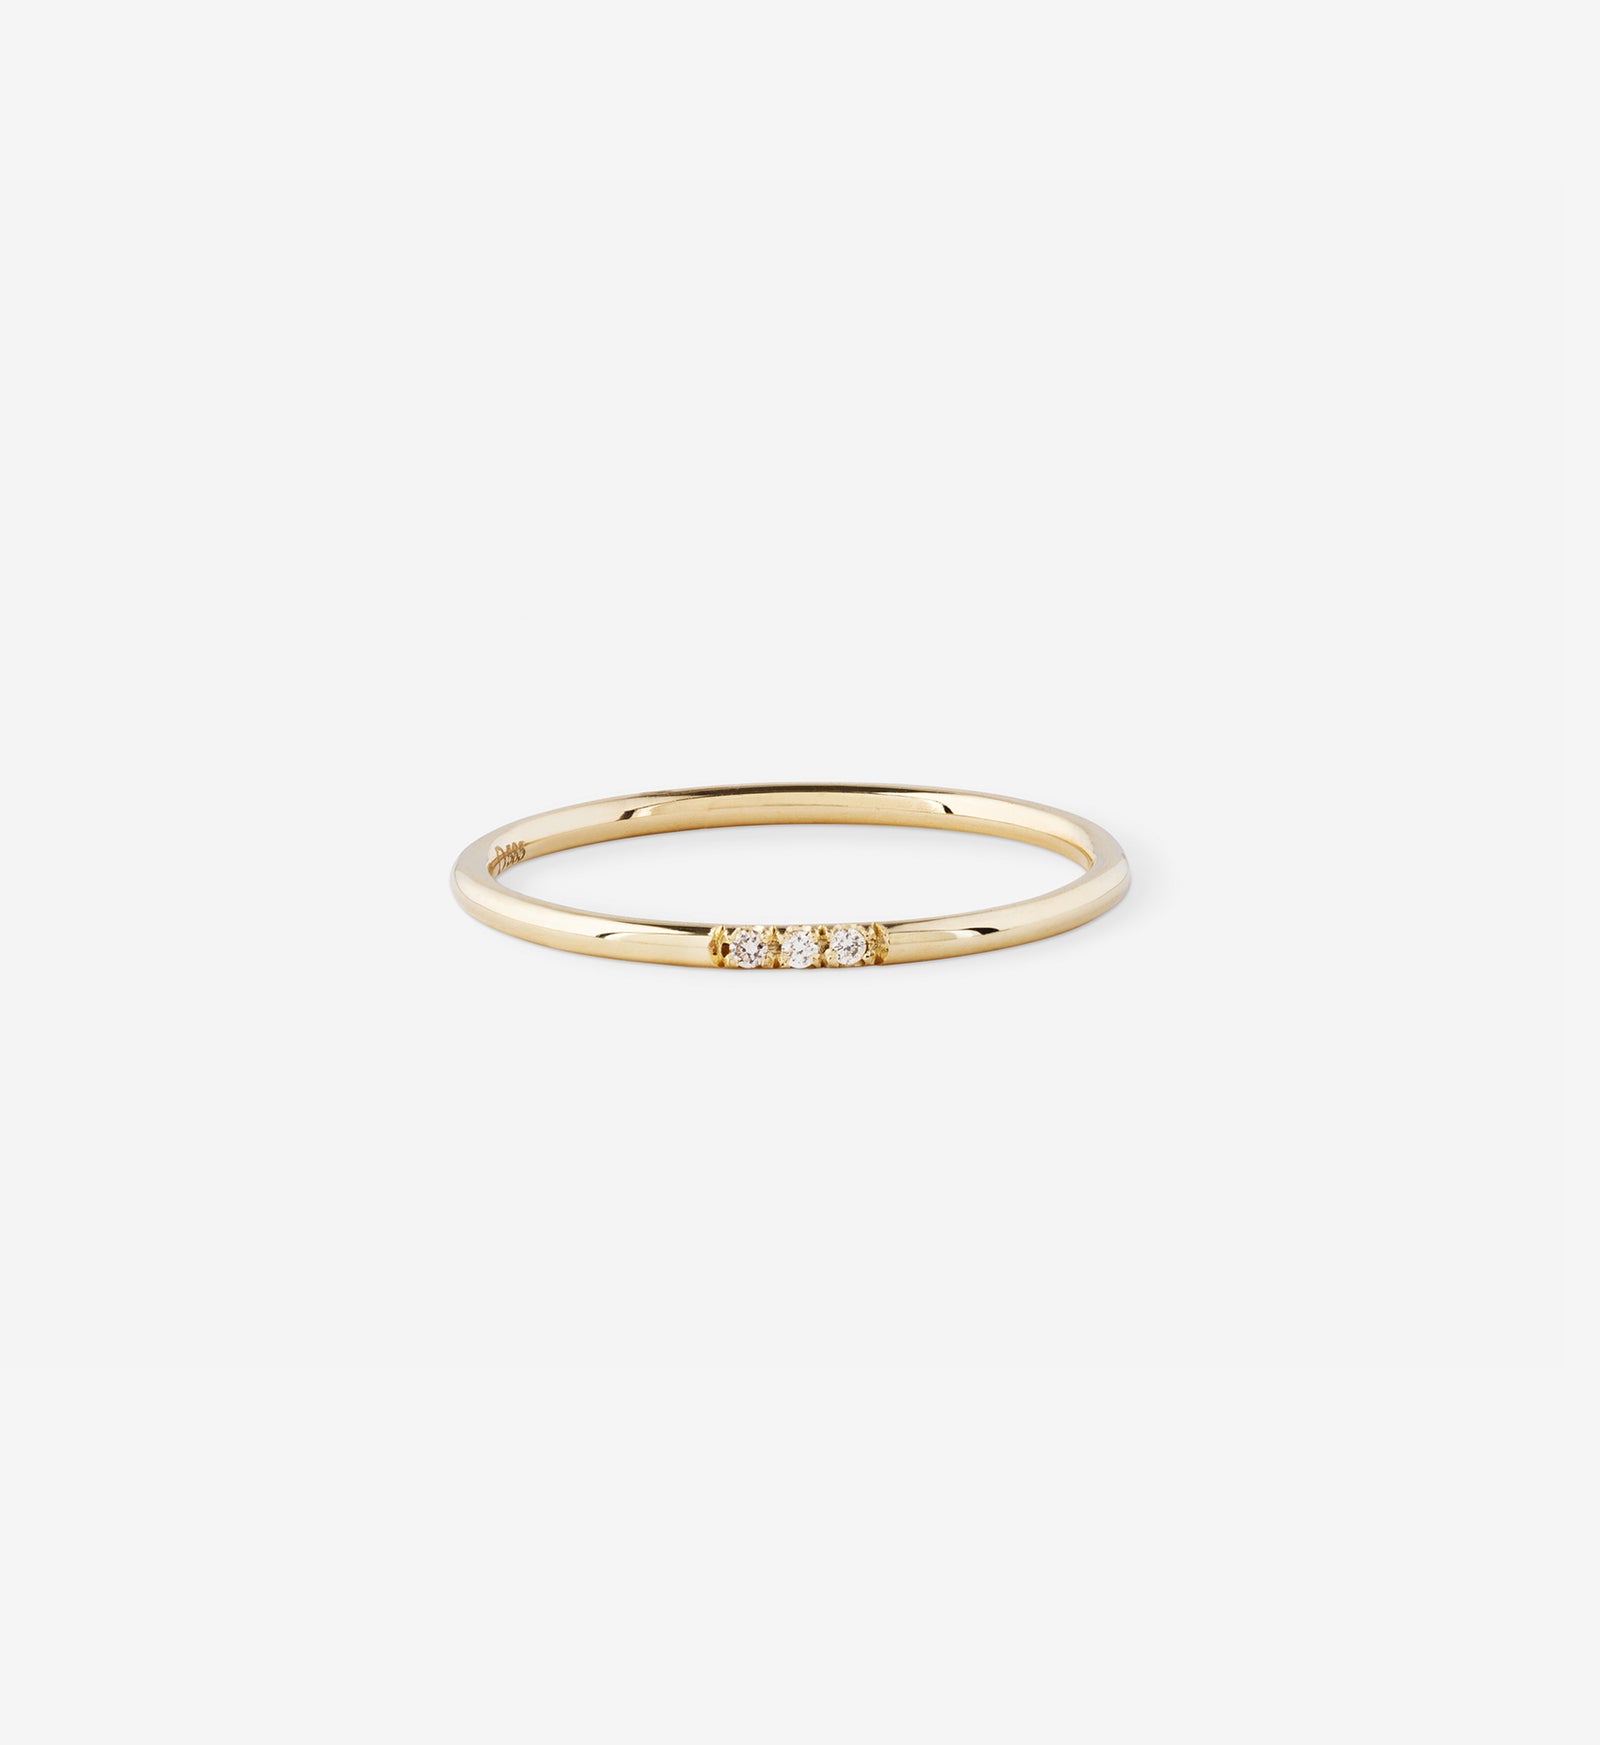 Rings | OUVERTURE Fine Jewelry